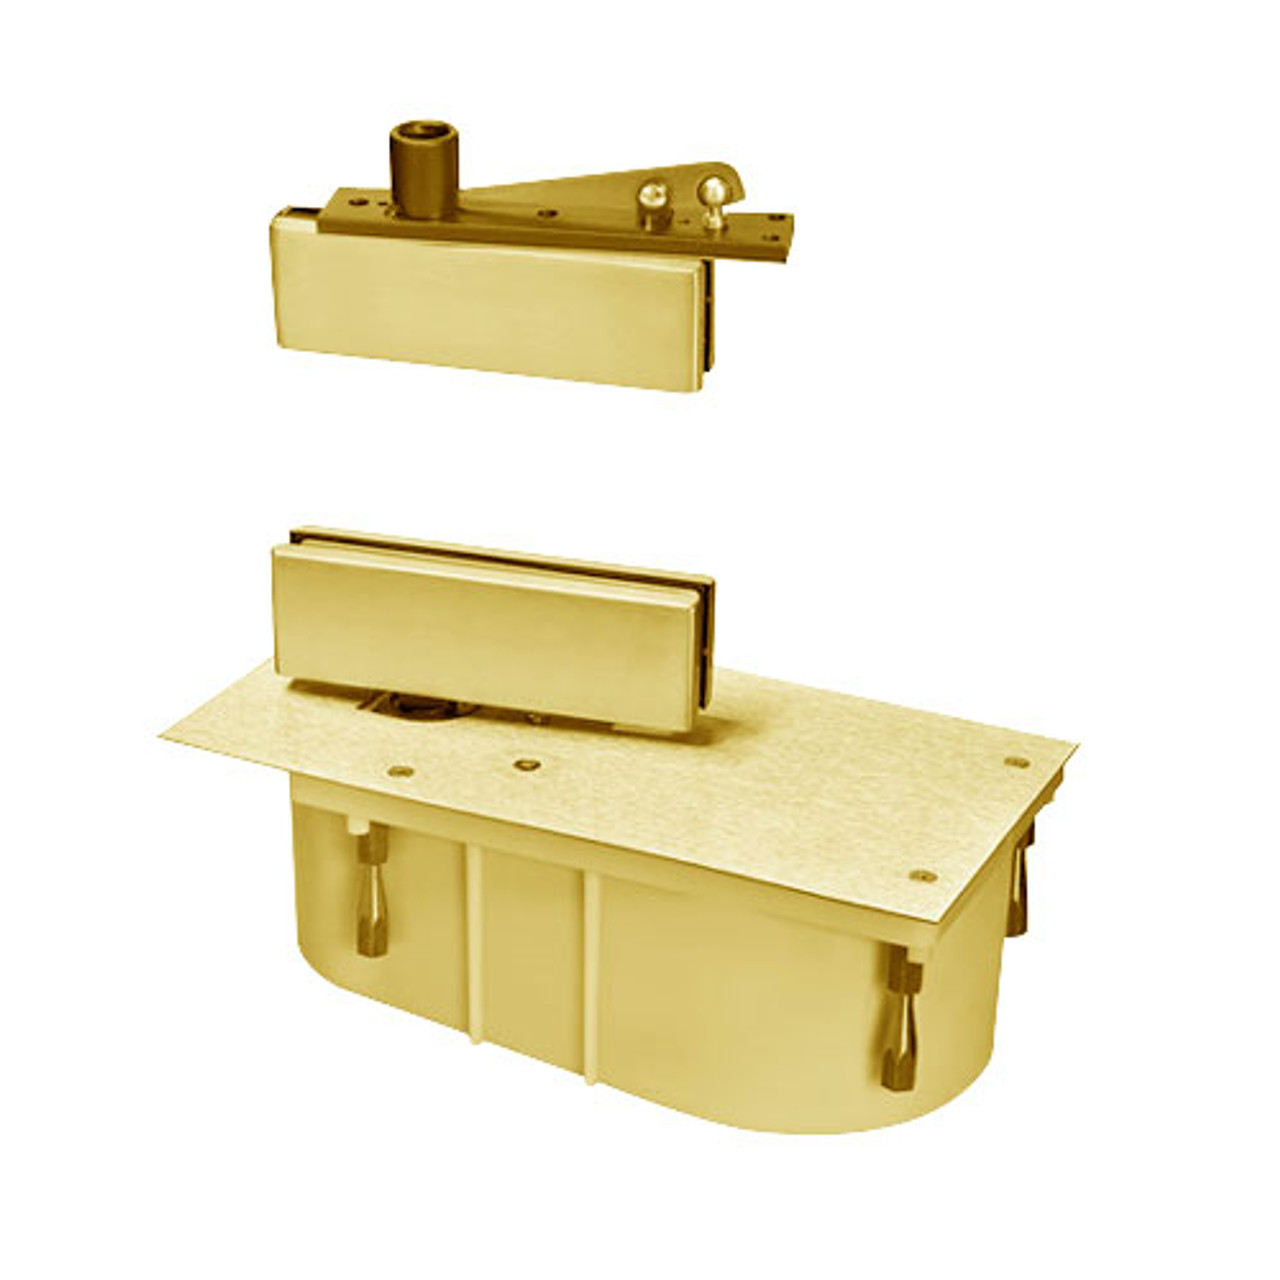 PH428-85S-LH-605 Rixson 428 Series Heavy Duty Single Acting Center Hung Floor Closer with Patch Fittings in Bright Brass Finish